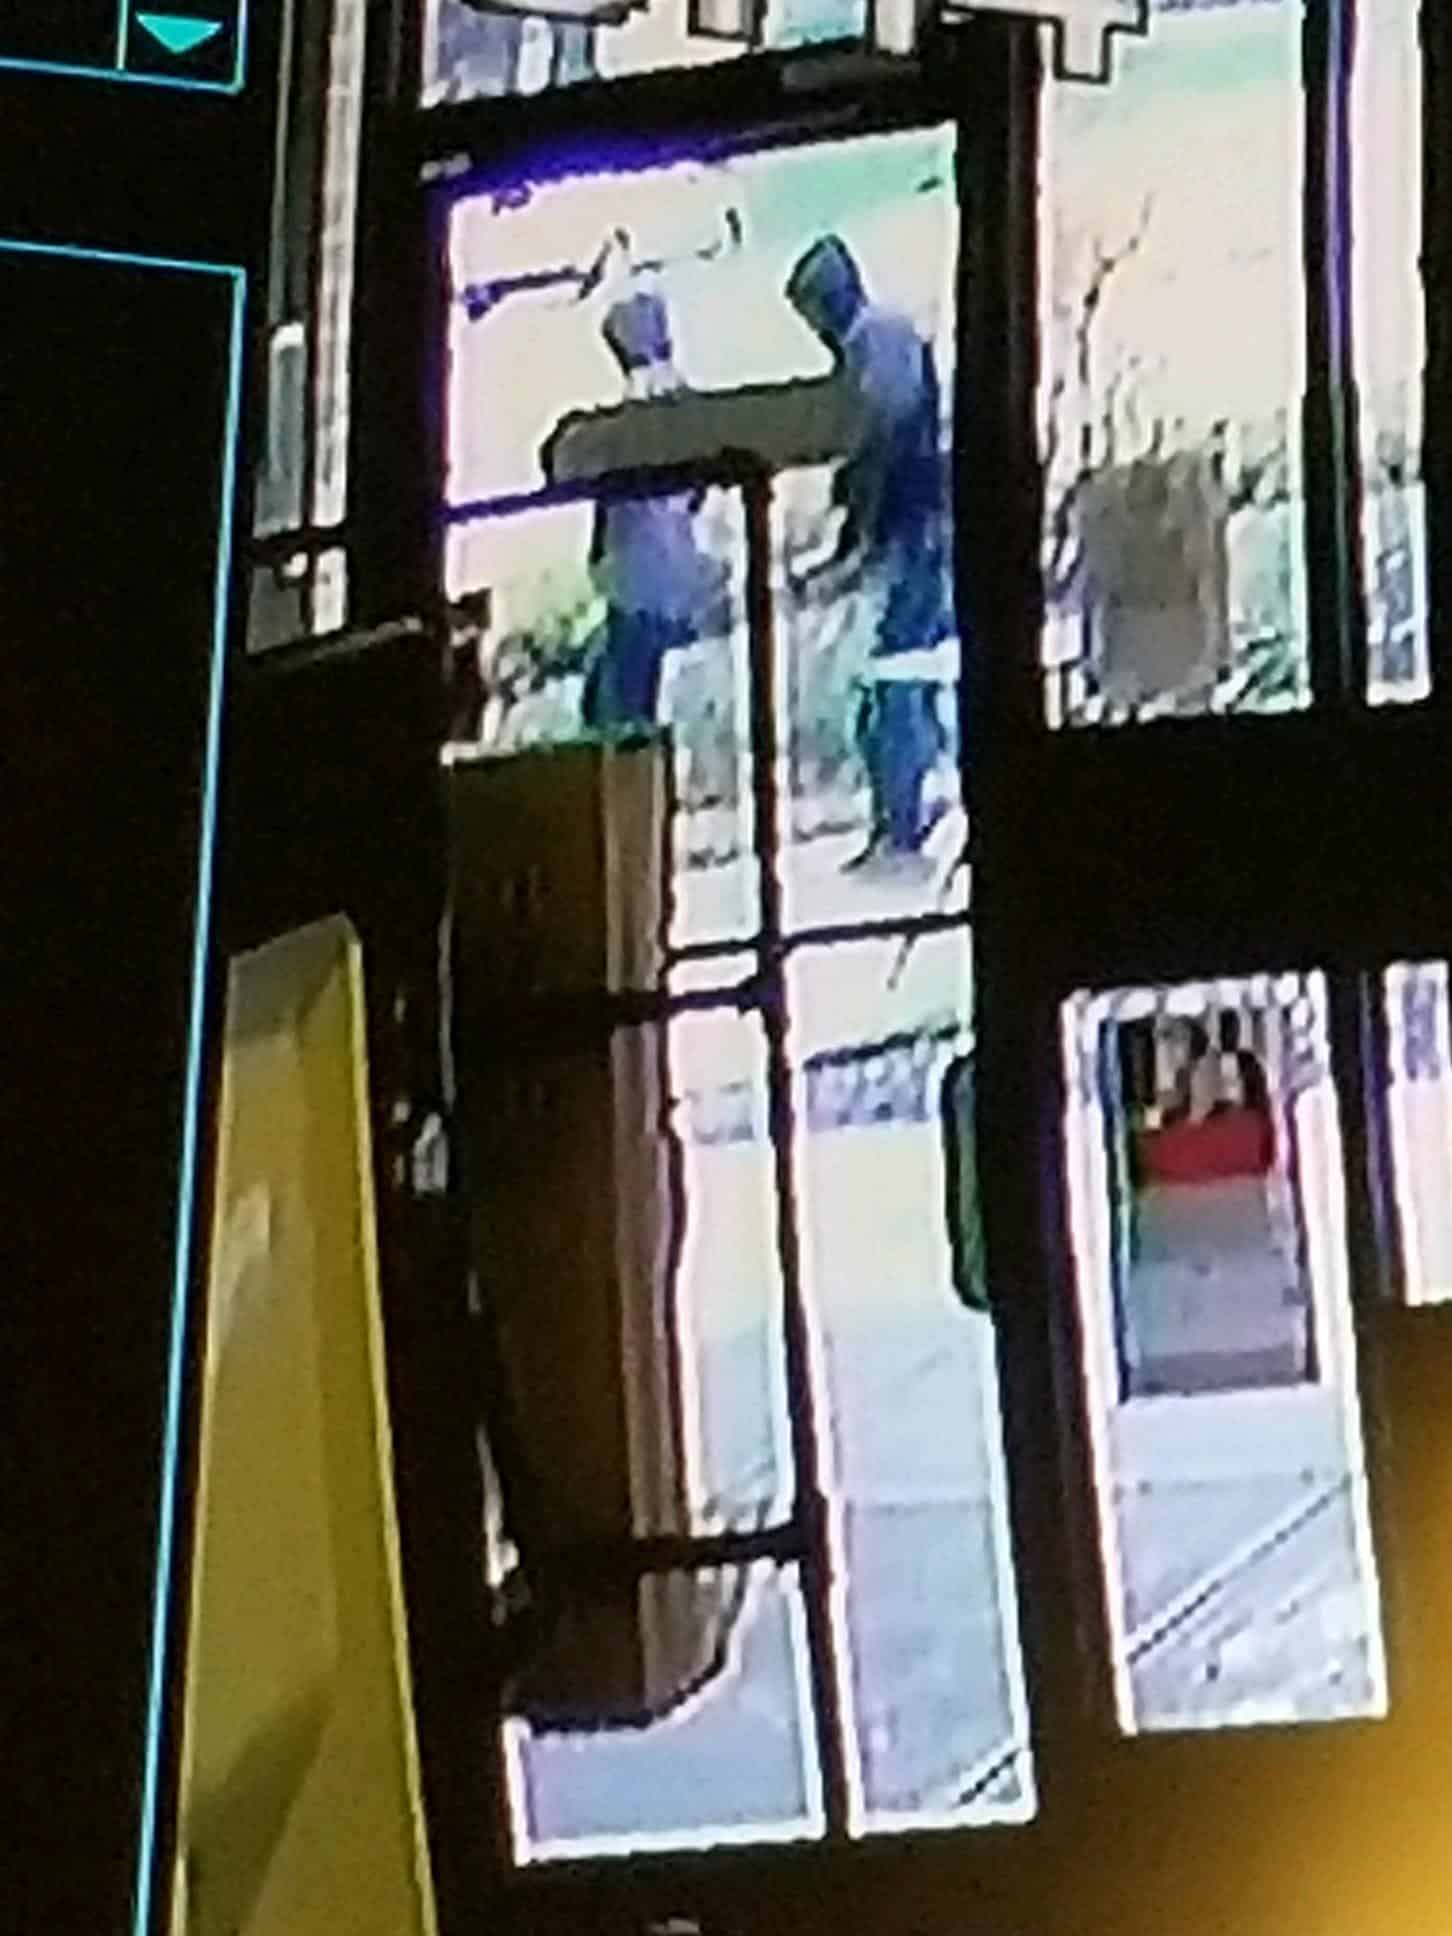 Surveillance footage of the attempted armed robbery (suspect on the right)